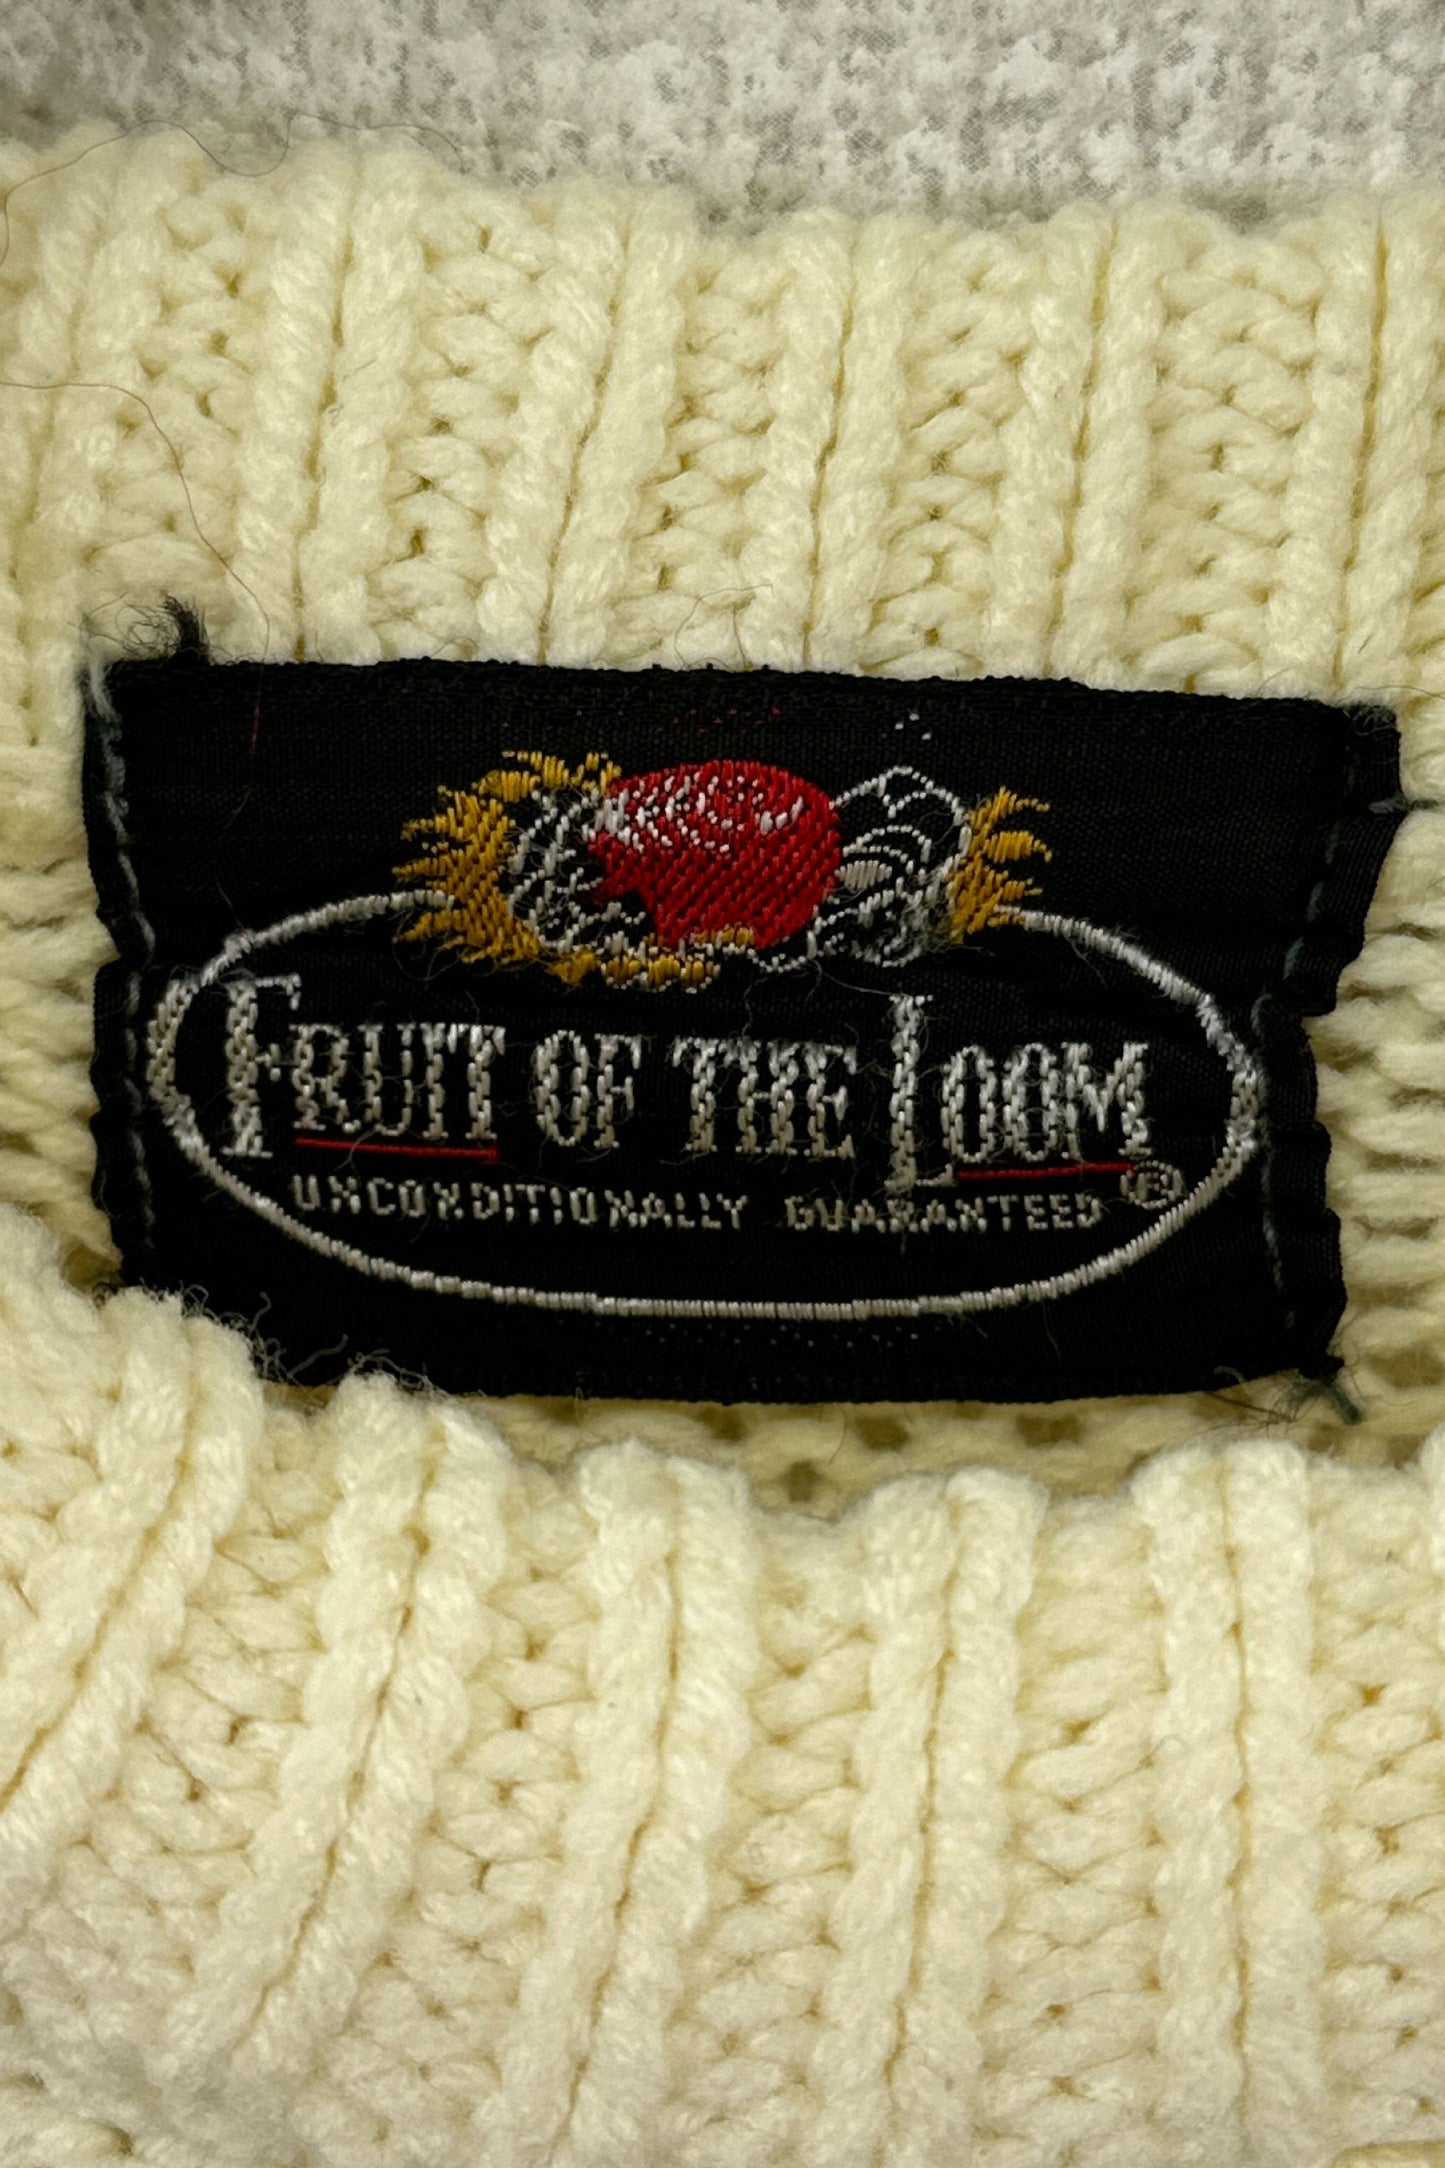 FRUIT OF THE LOOM white sweater